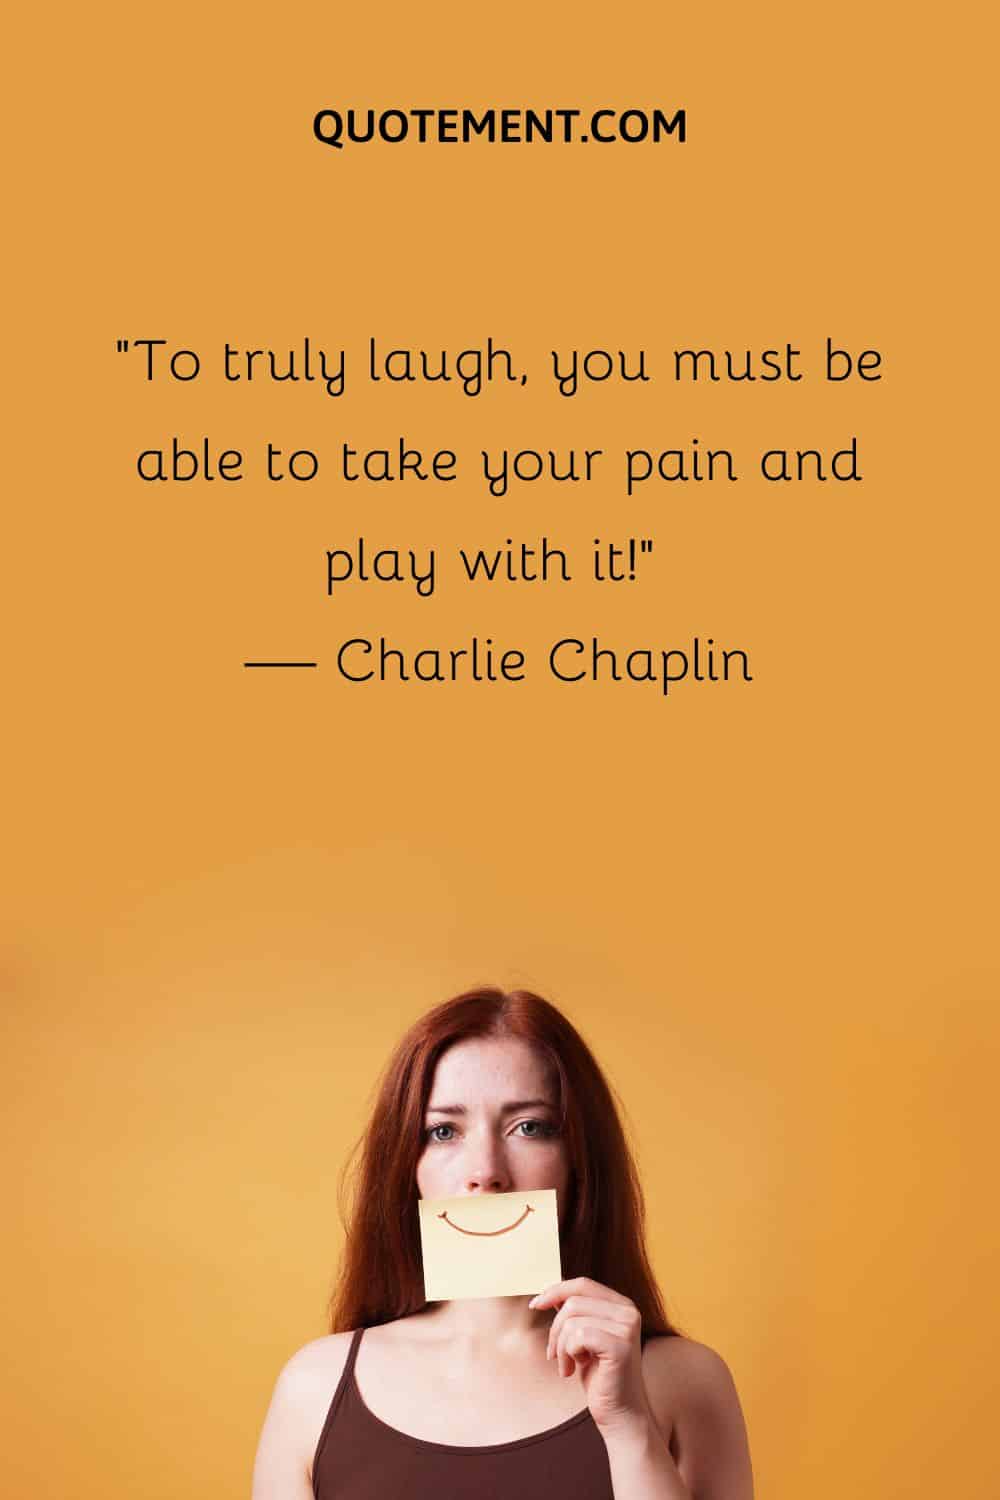 To truly laugh, you must be able to take your pain and play with it